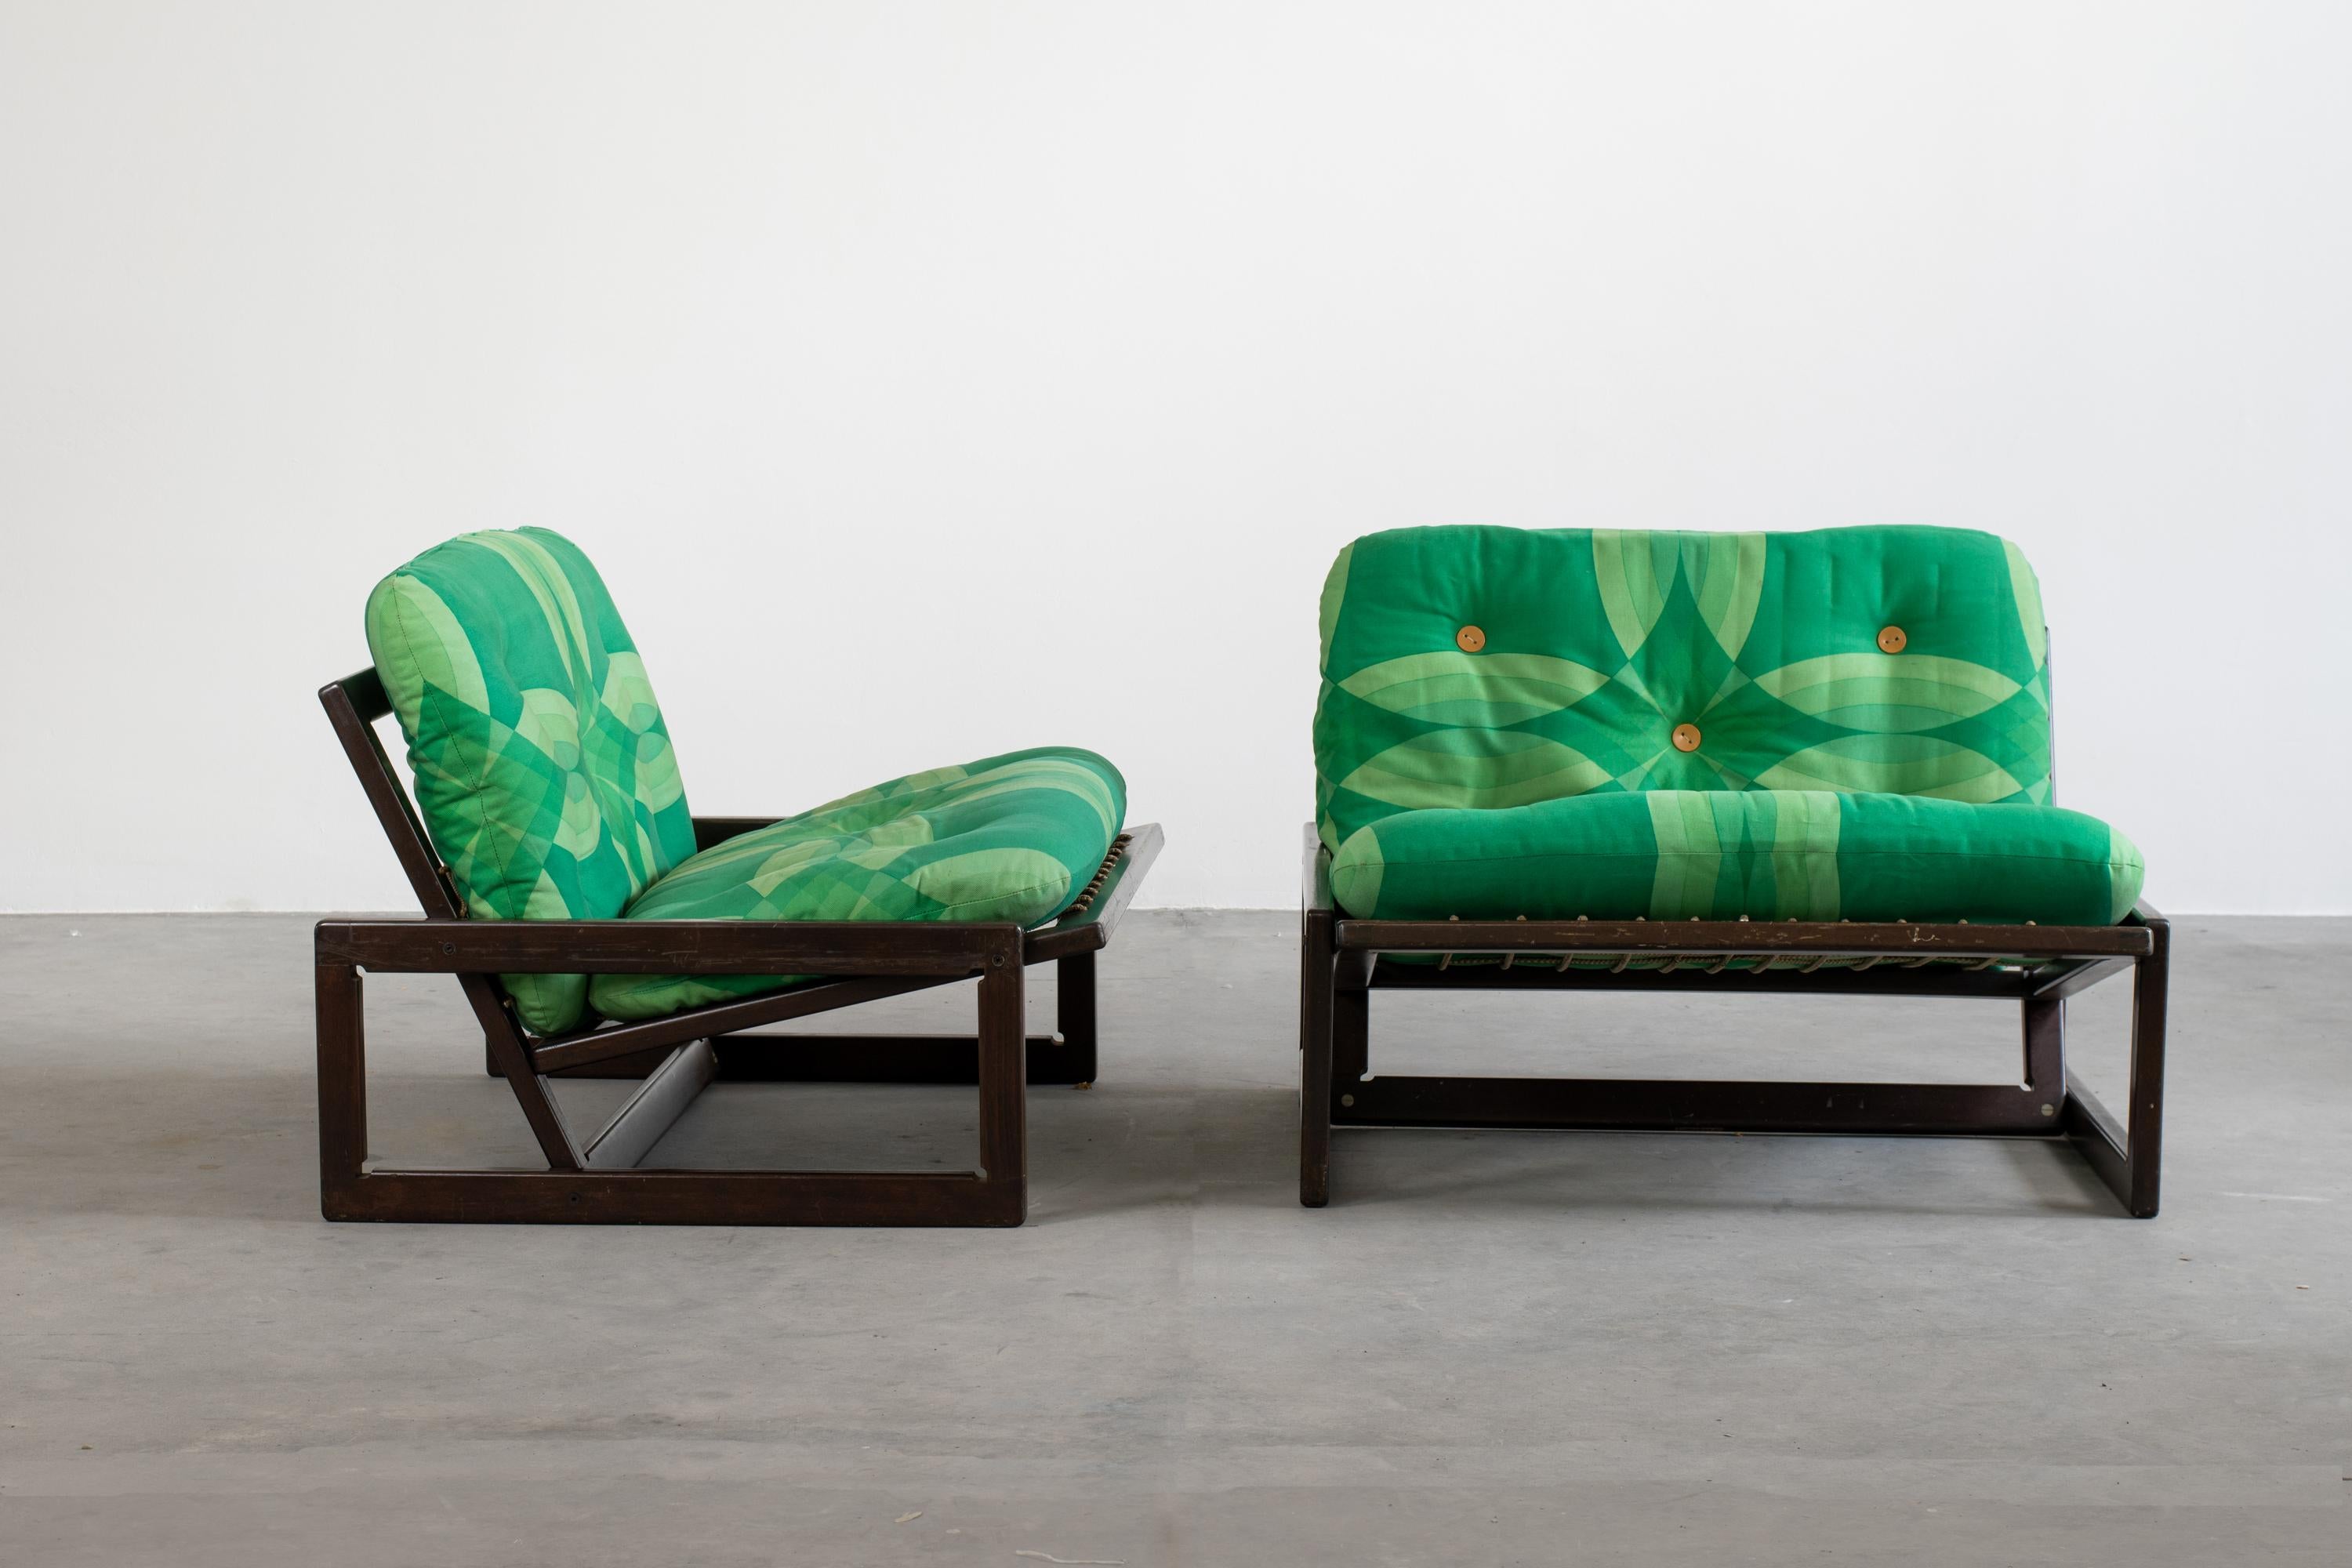 Set of two Carlotta chairs designed by Afra and Tobia Scarpa, Produced by Cassina in 1967.
The chairs present a wooden structure upholstered by cushions covered in a green fancy fabric and supported by elastic bands.


Licterature: Giuliana